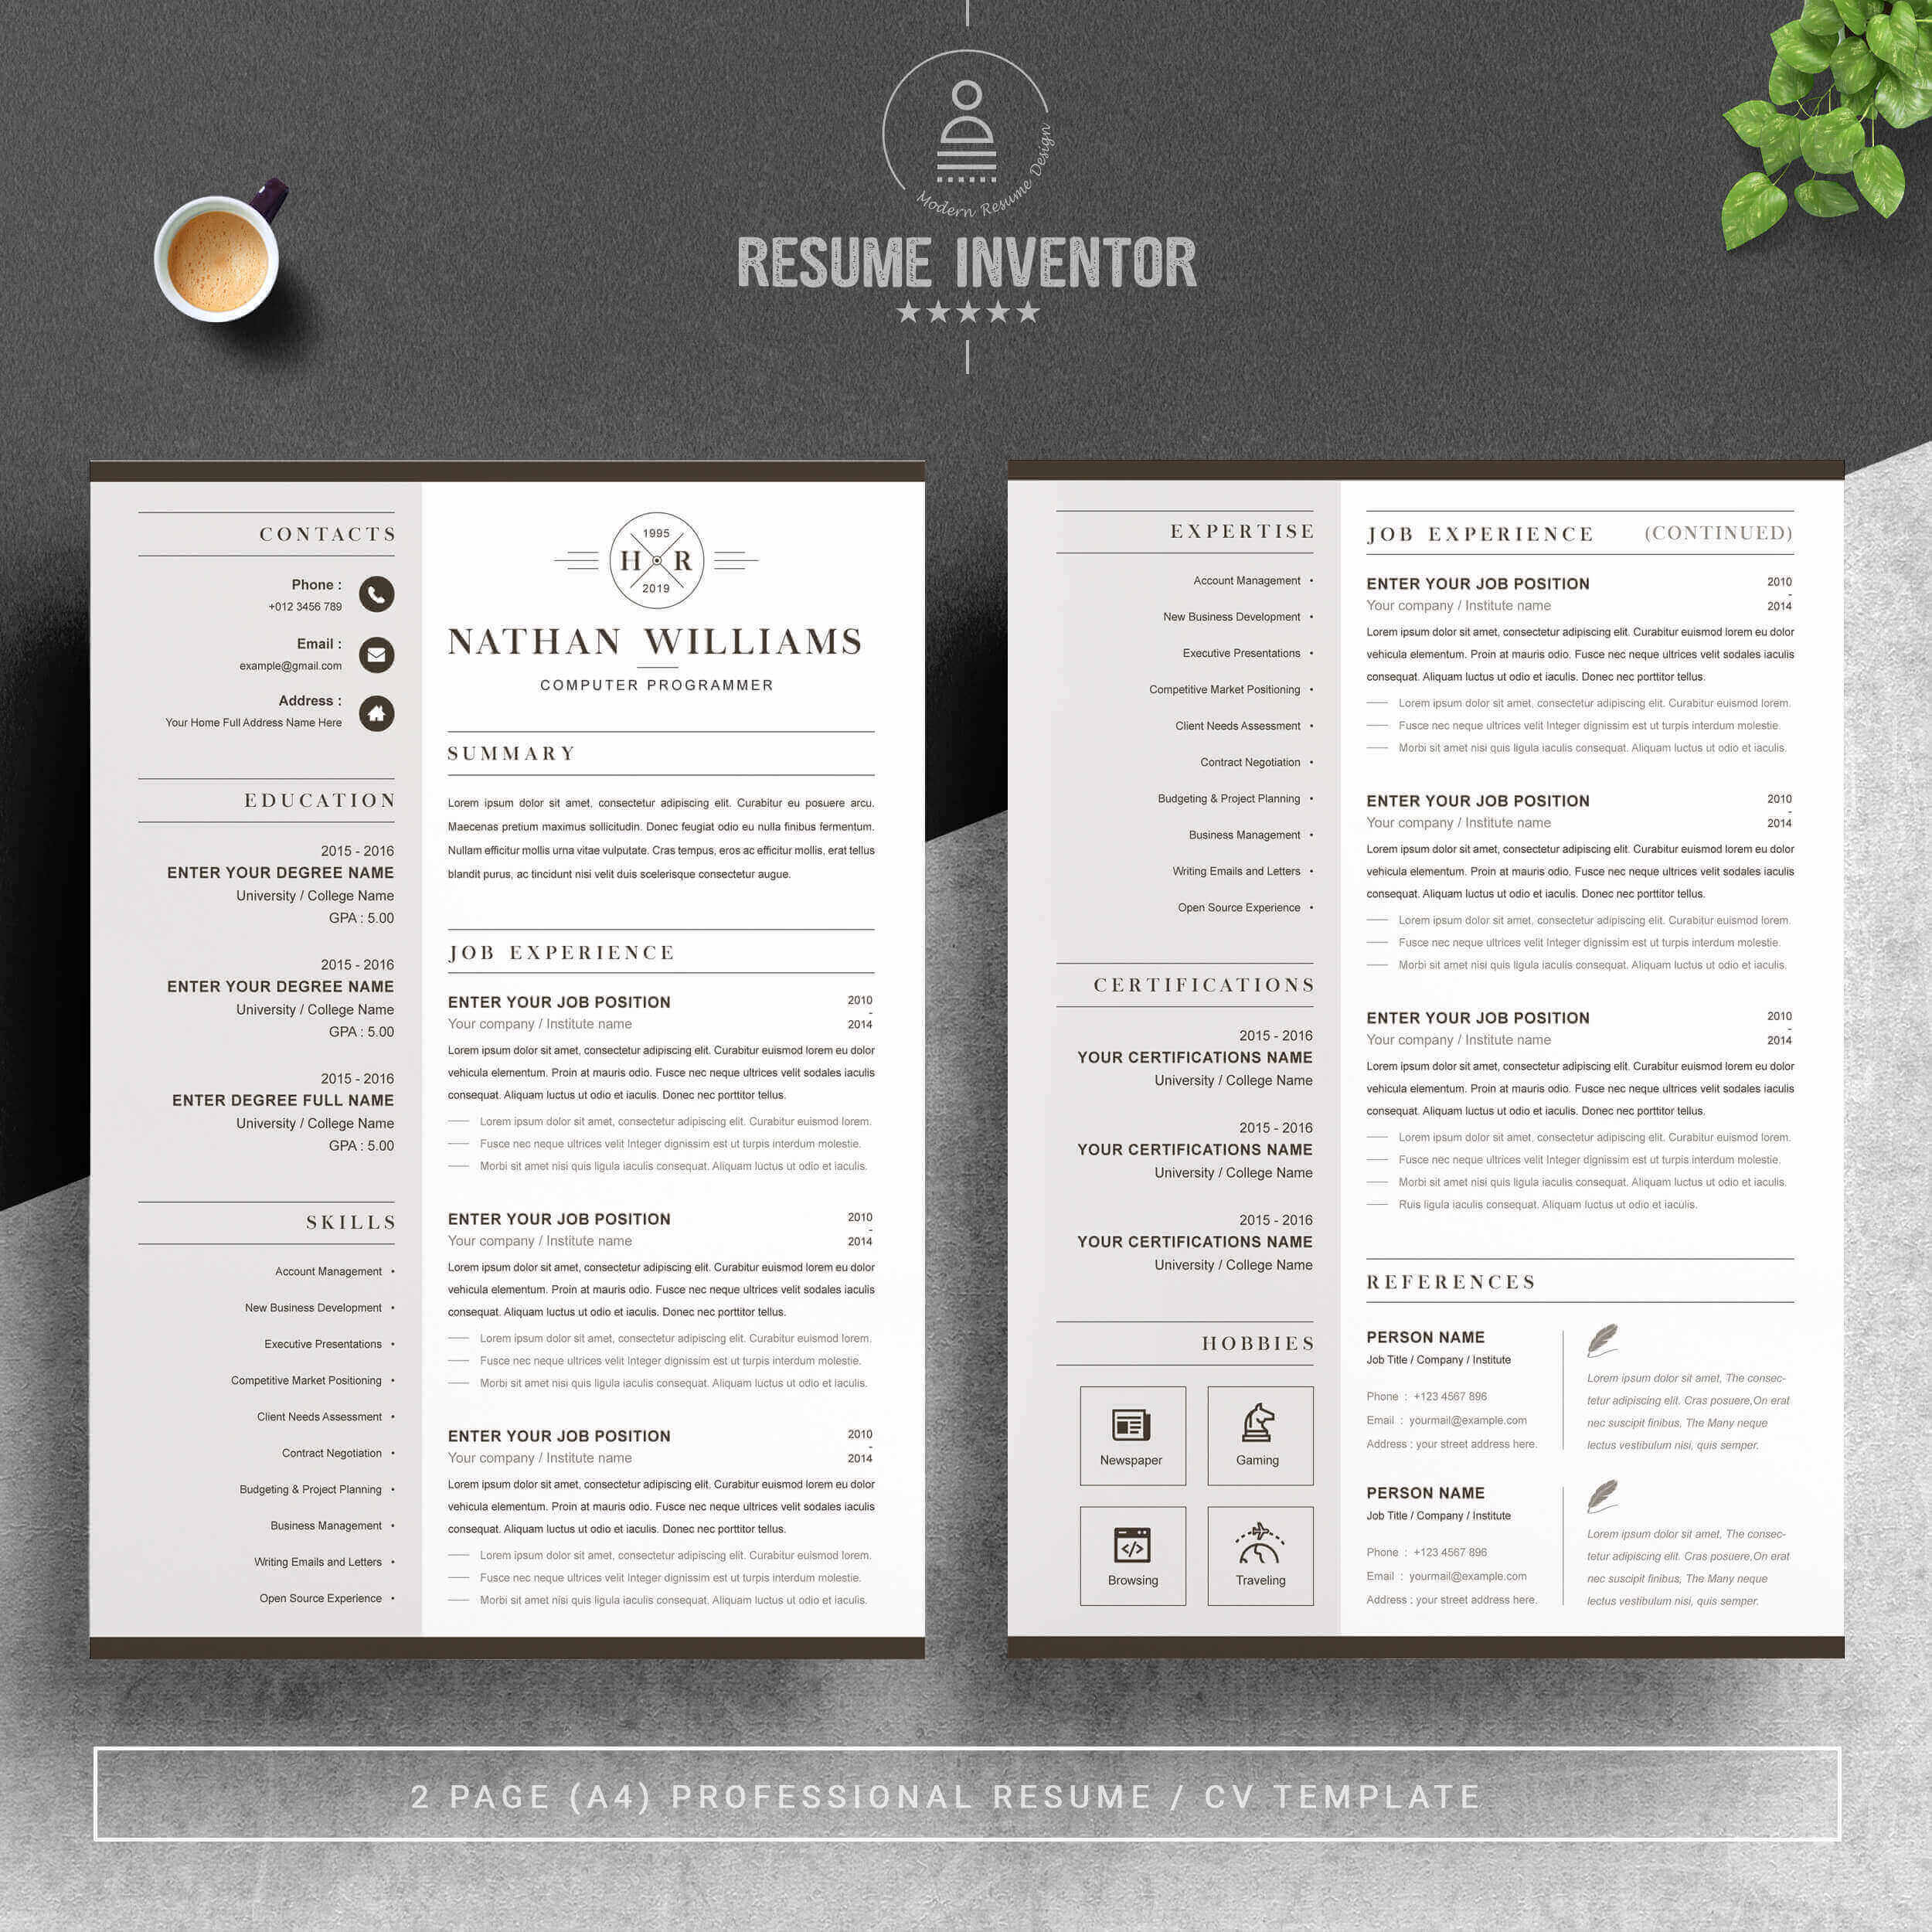 Computer Programmer Modern Resume Template | InDesign Resume Template preview image.